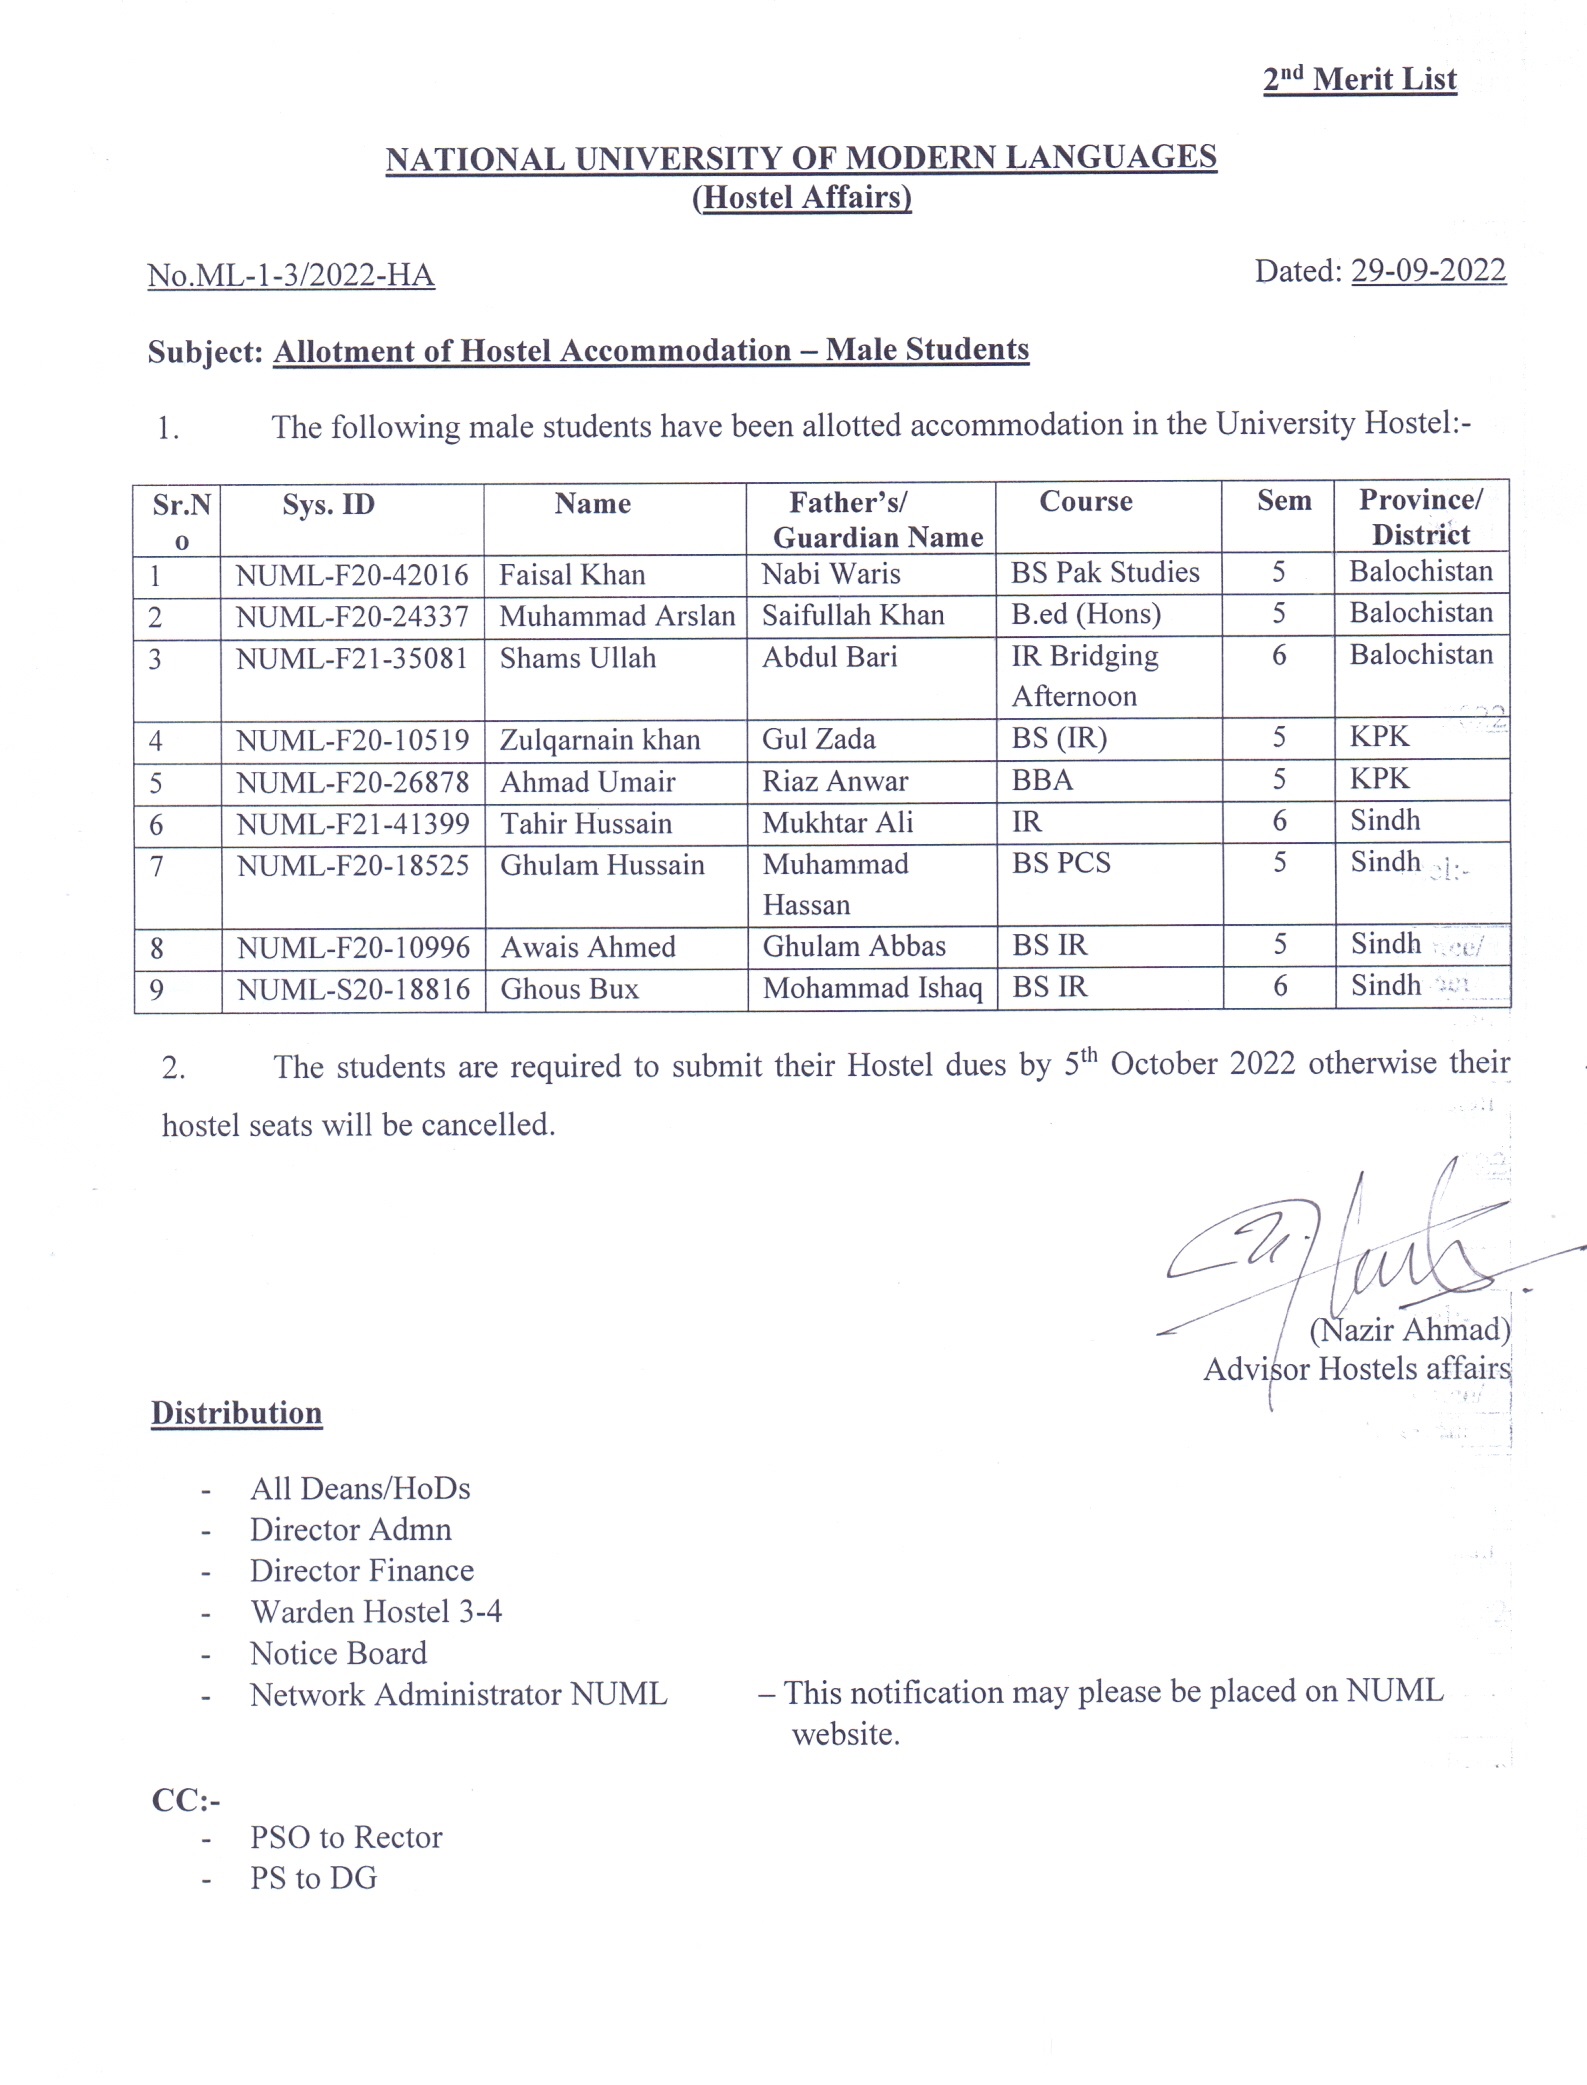 Allotment of Hostel Accommodation - Male Students